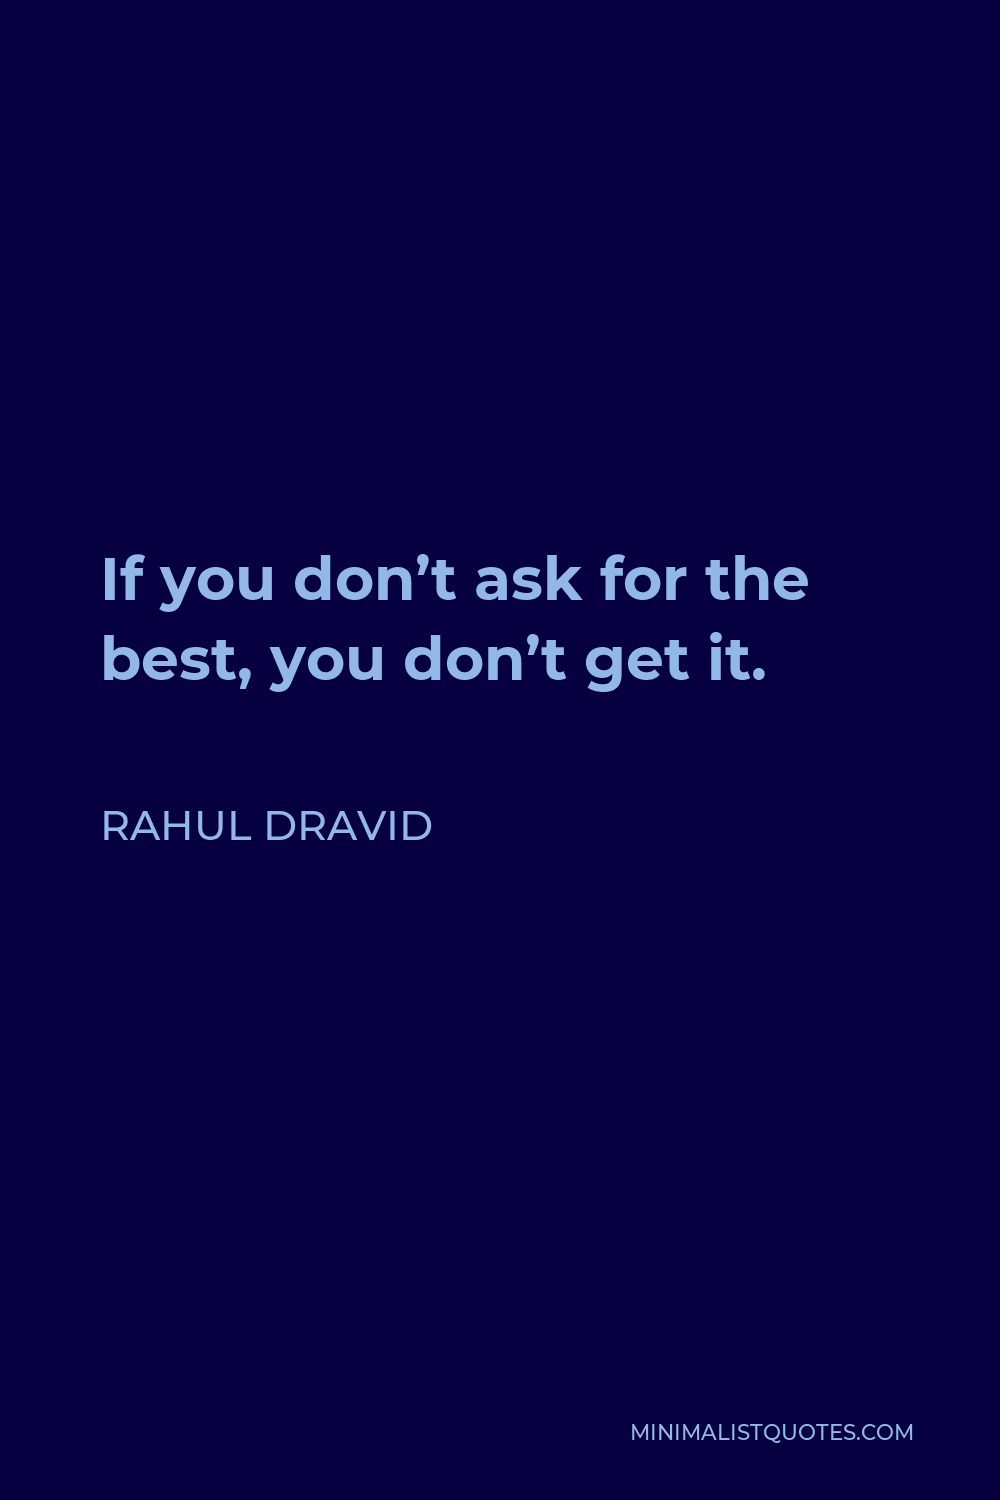 Rahul Dravid Quote - If you don’t ask for the best, you don’t get it.